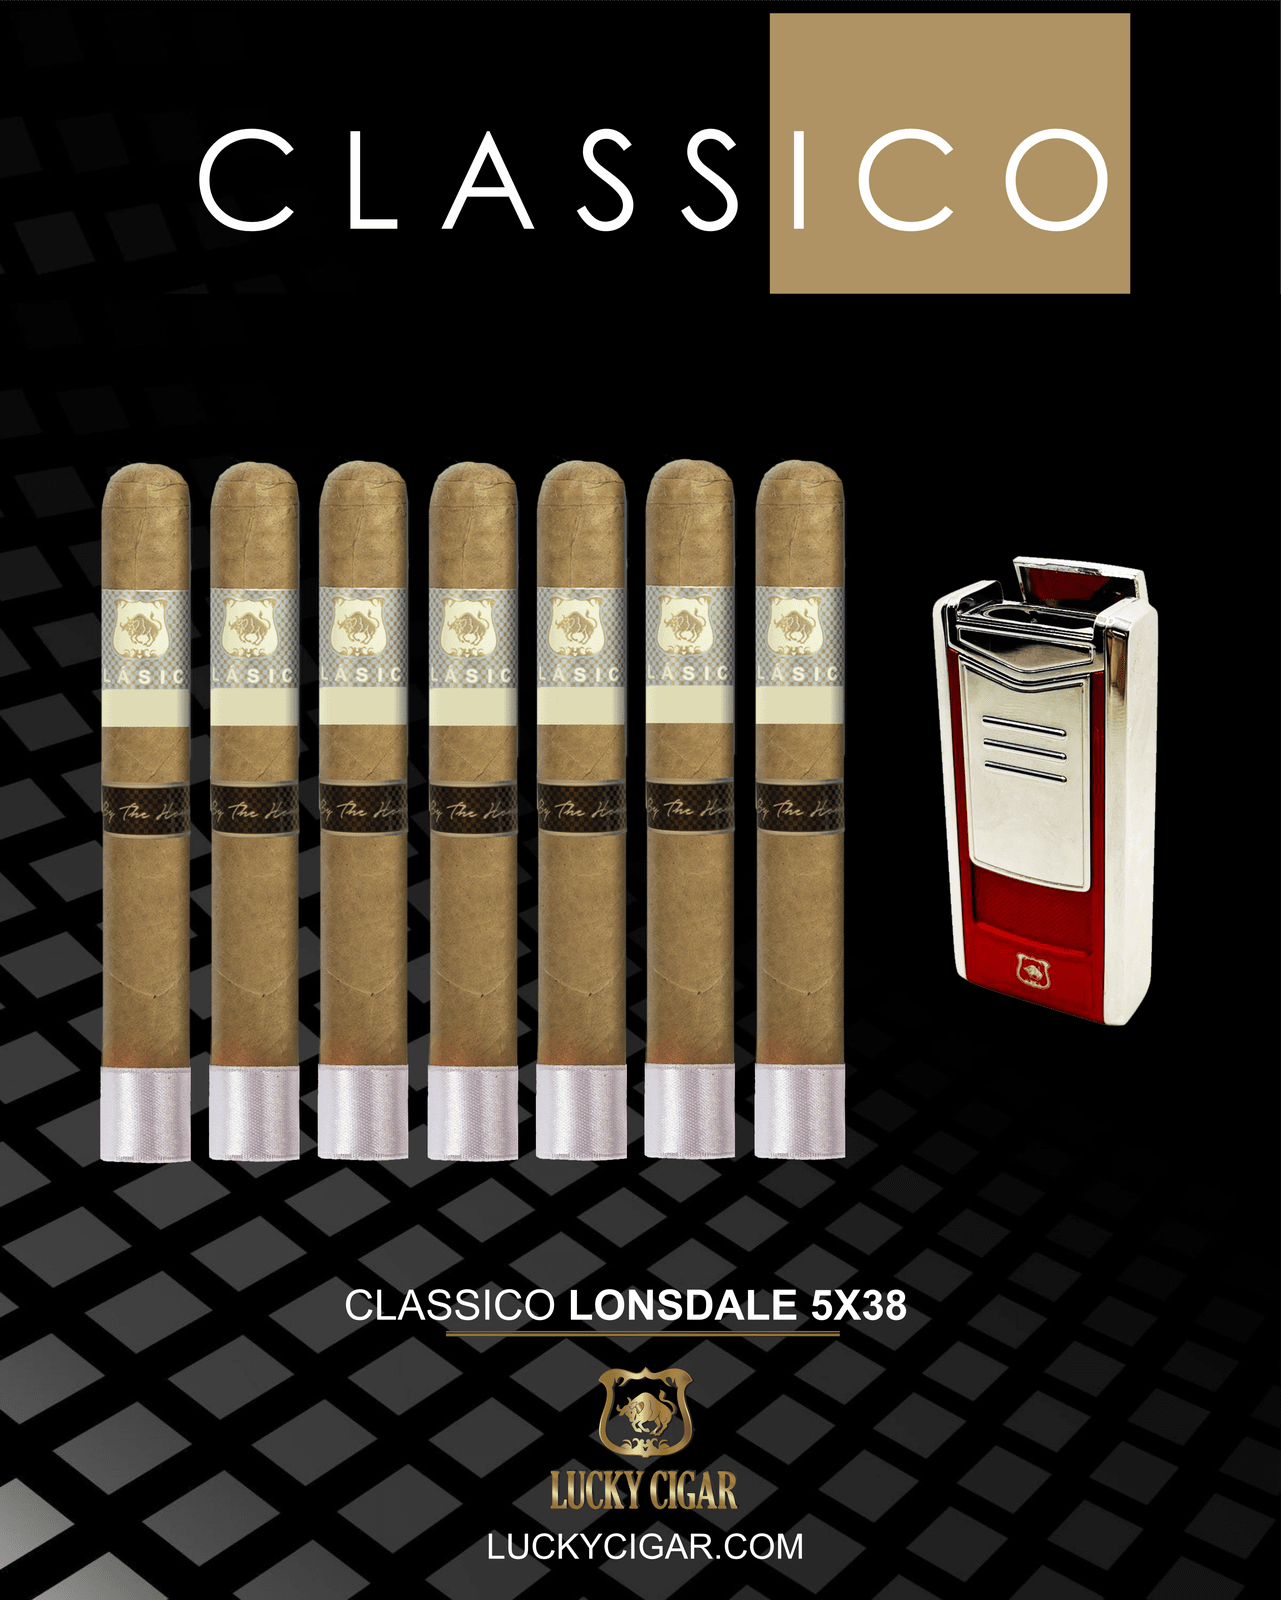 Classic Cigars - Classico by Lucky Cigar: Set of 7 Cigars, 7 Lonsdale with Red Torch